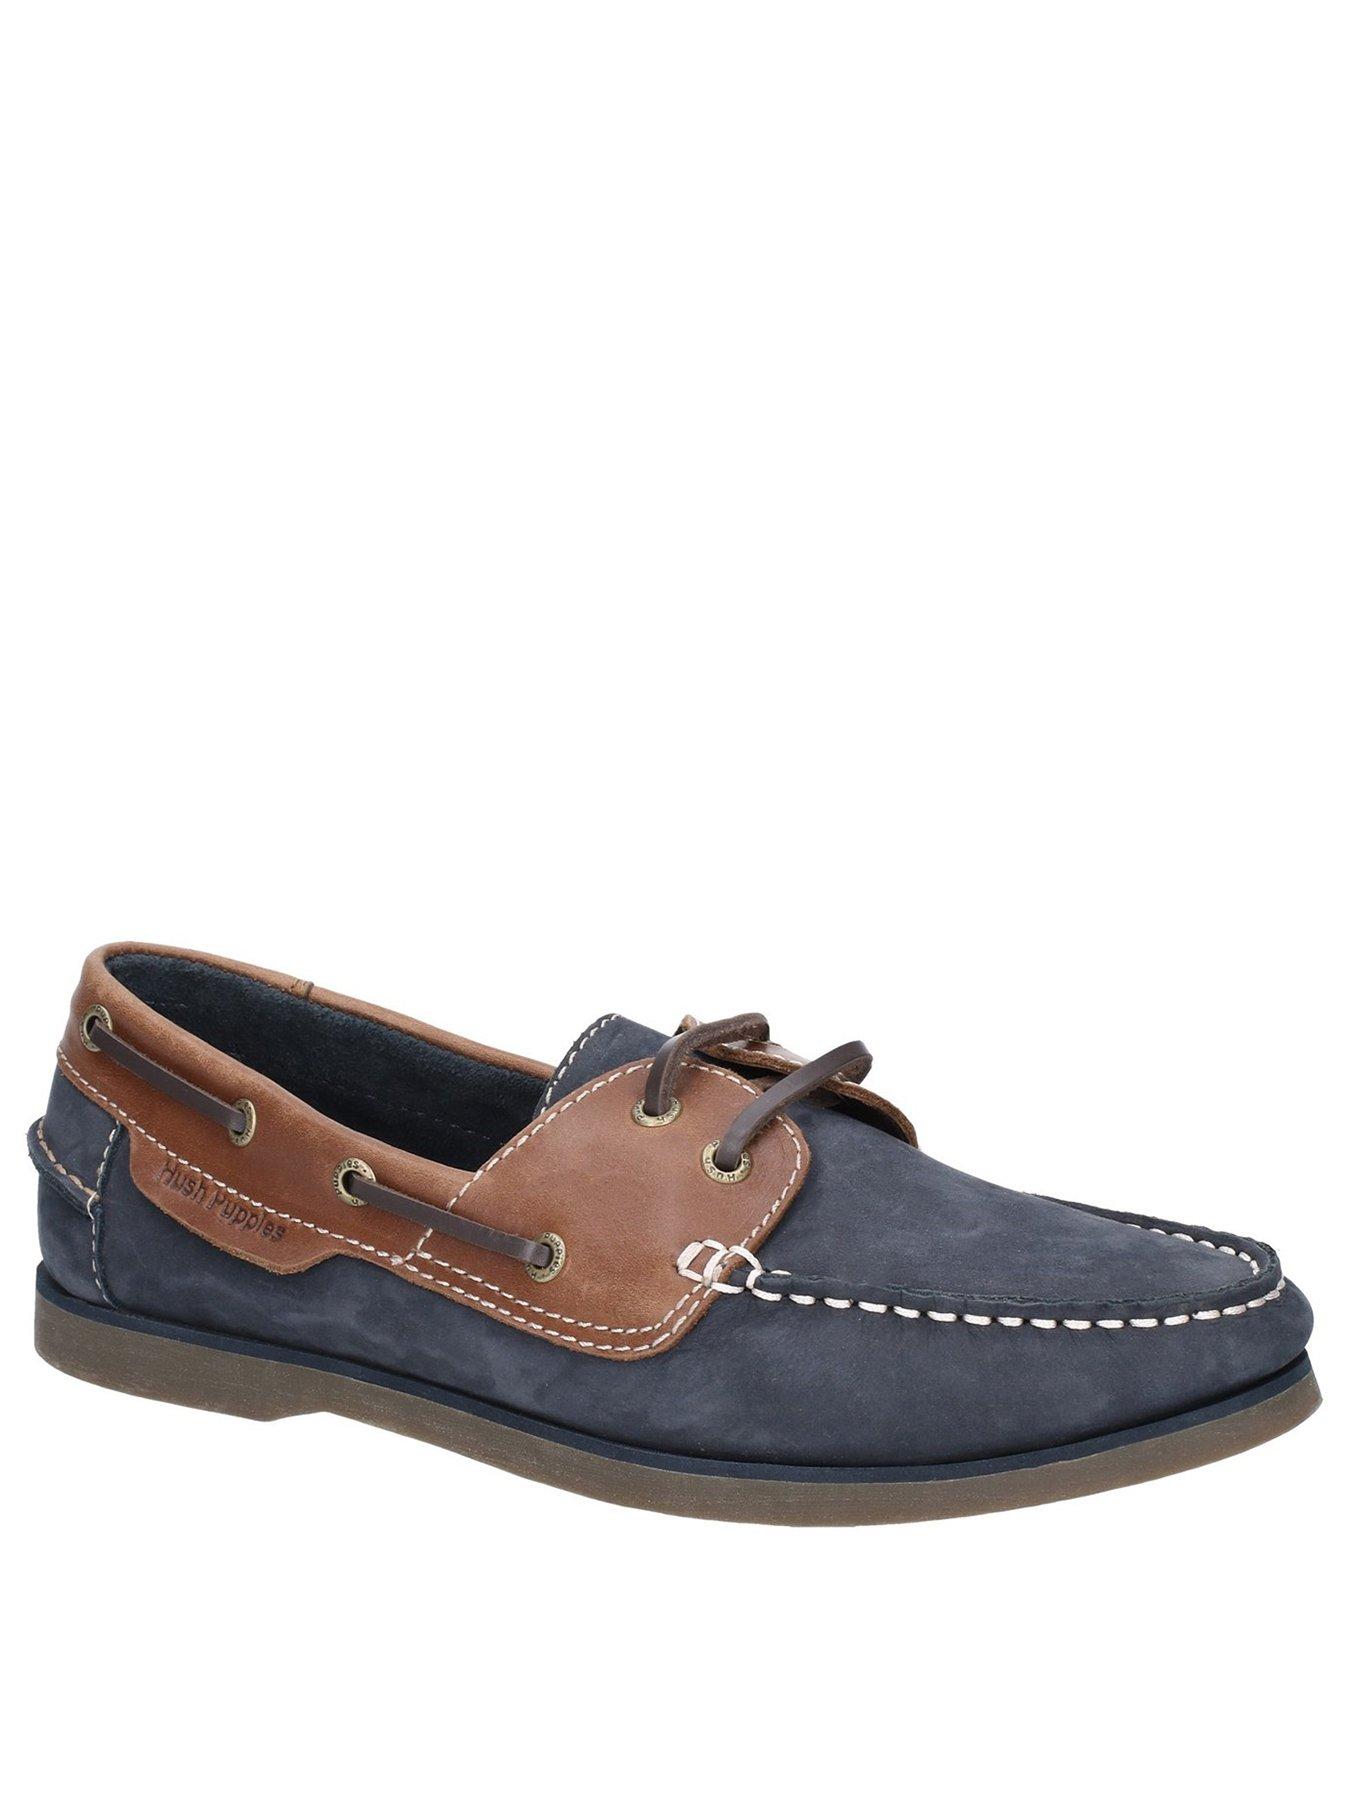 Hush Puppies Henry Boat Shoes - Blue | very.co.uk